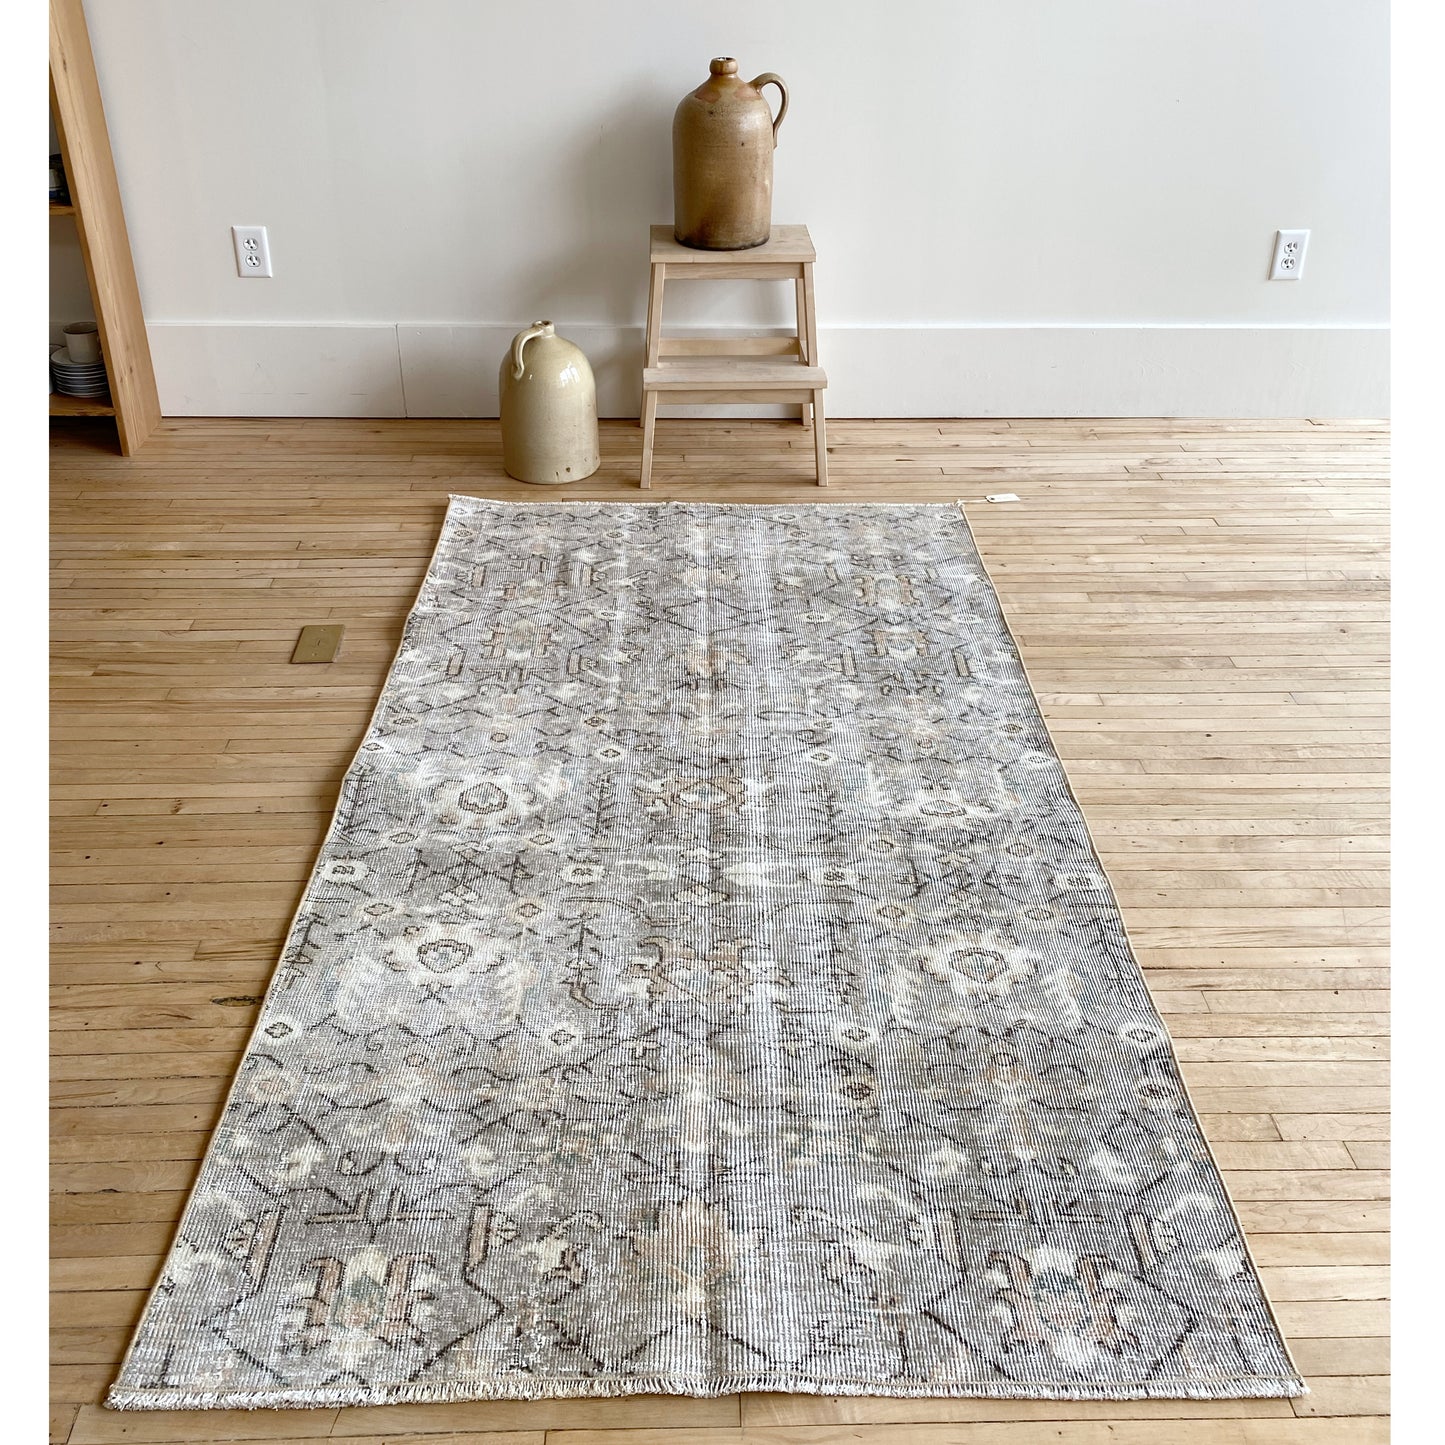 THEA Vintage Hand-knotted Wool Rug (3.8 x 6.5)